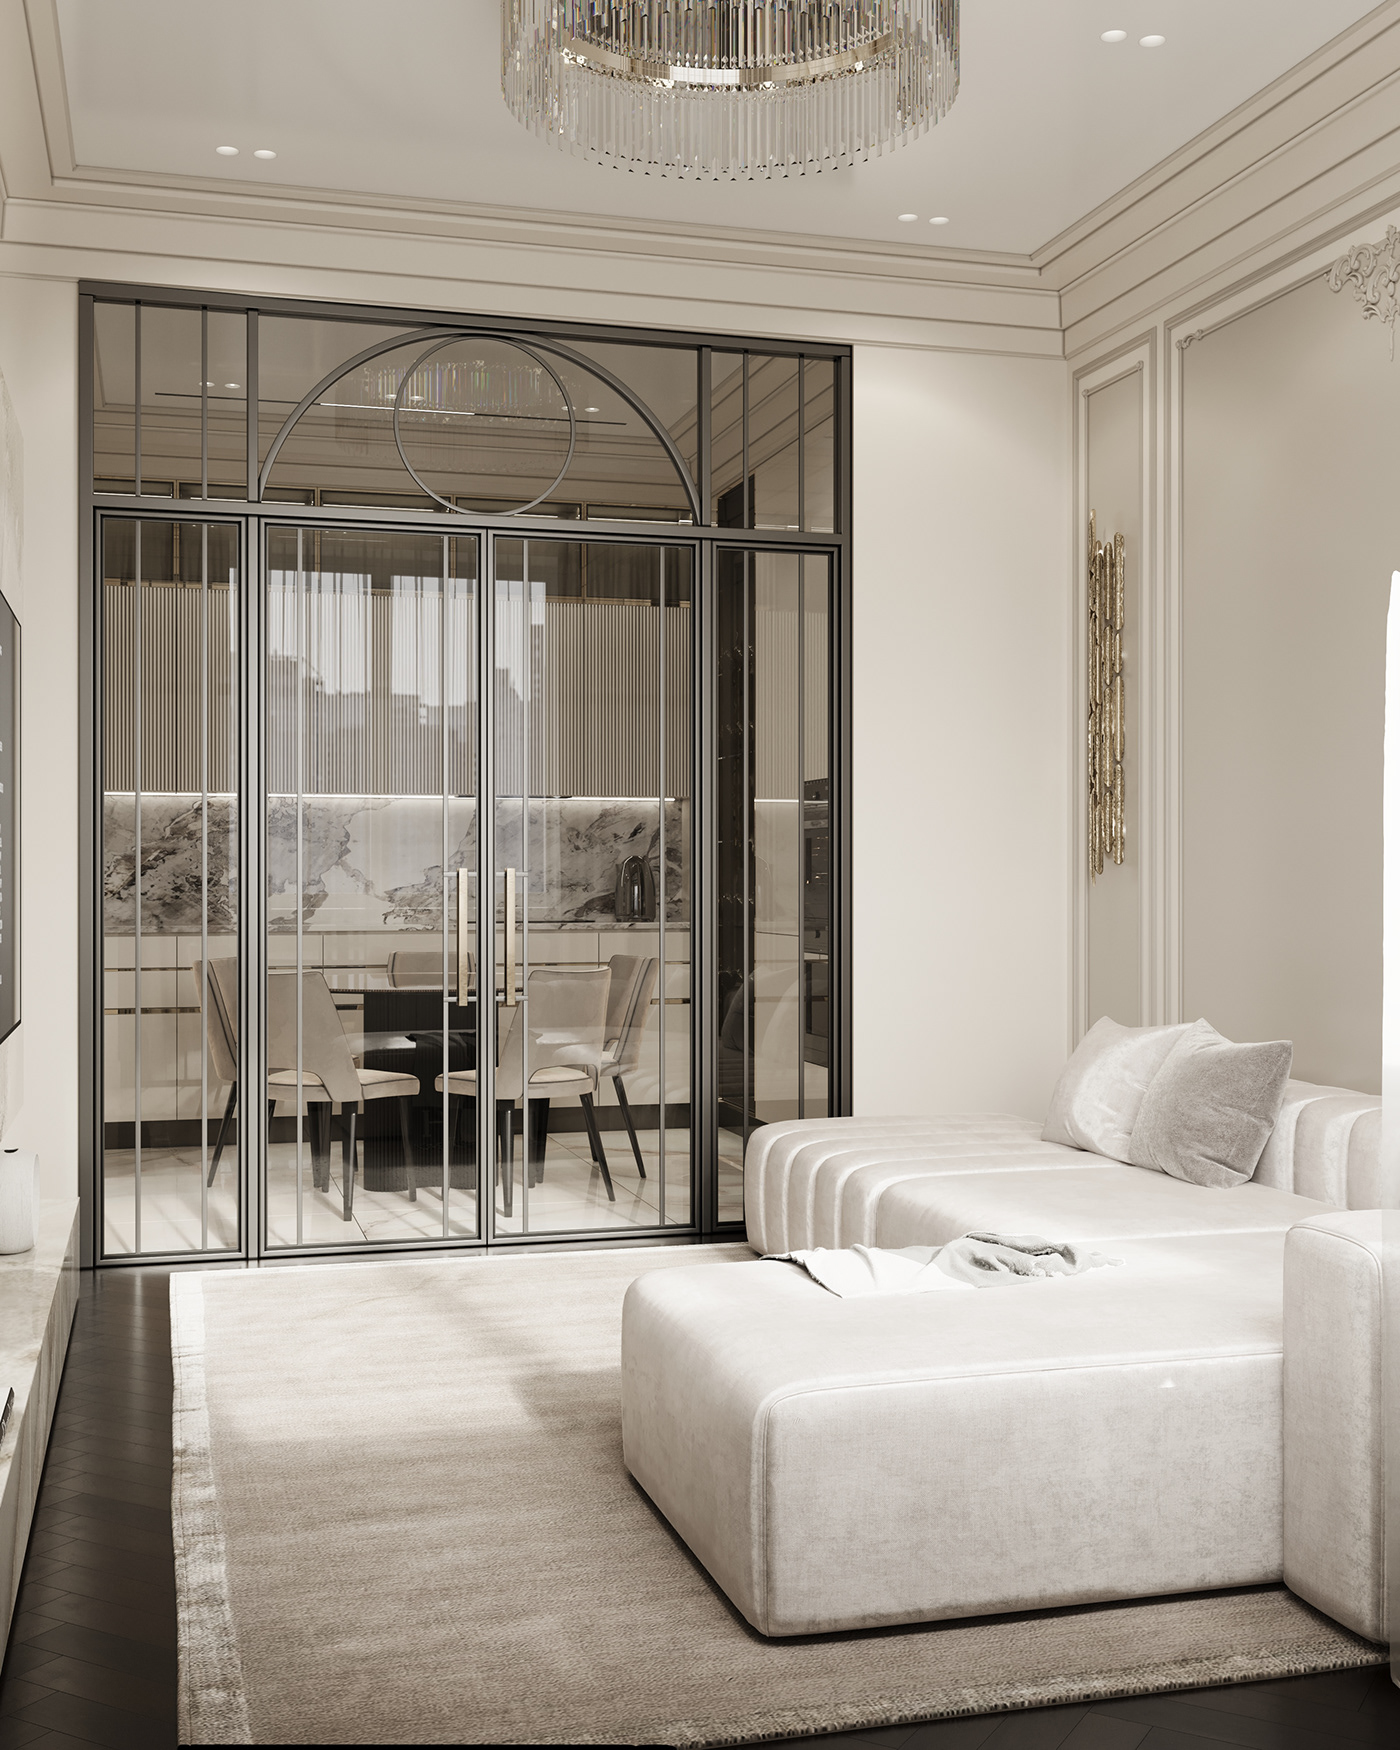 3D Visualization Render Interior Visualization living room neoclassical визуализация интерьер Визуализация интерьера visualization interior design 